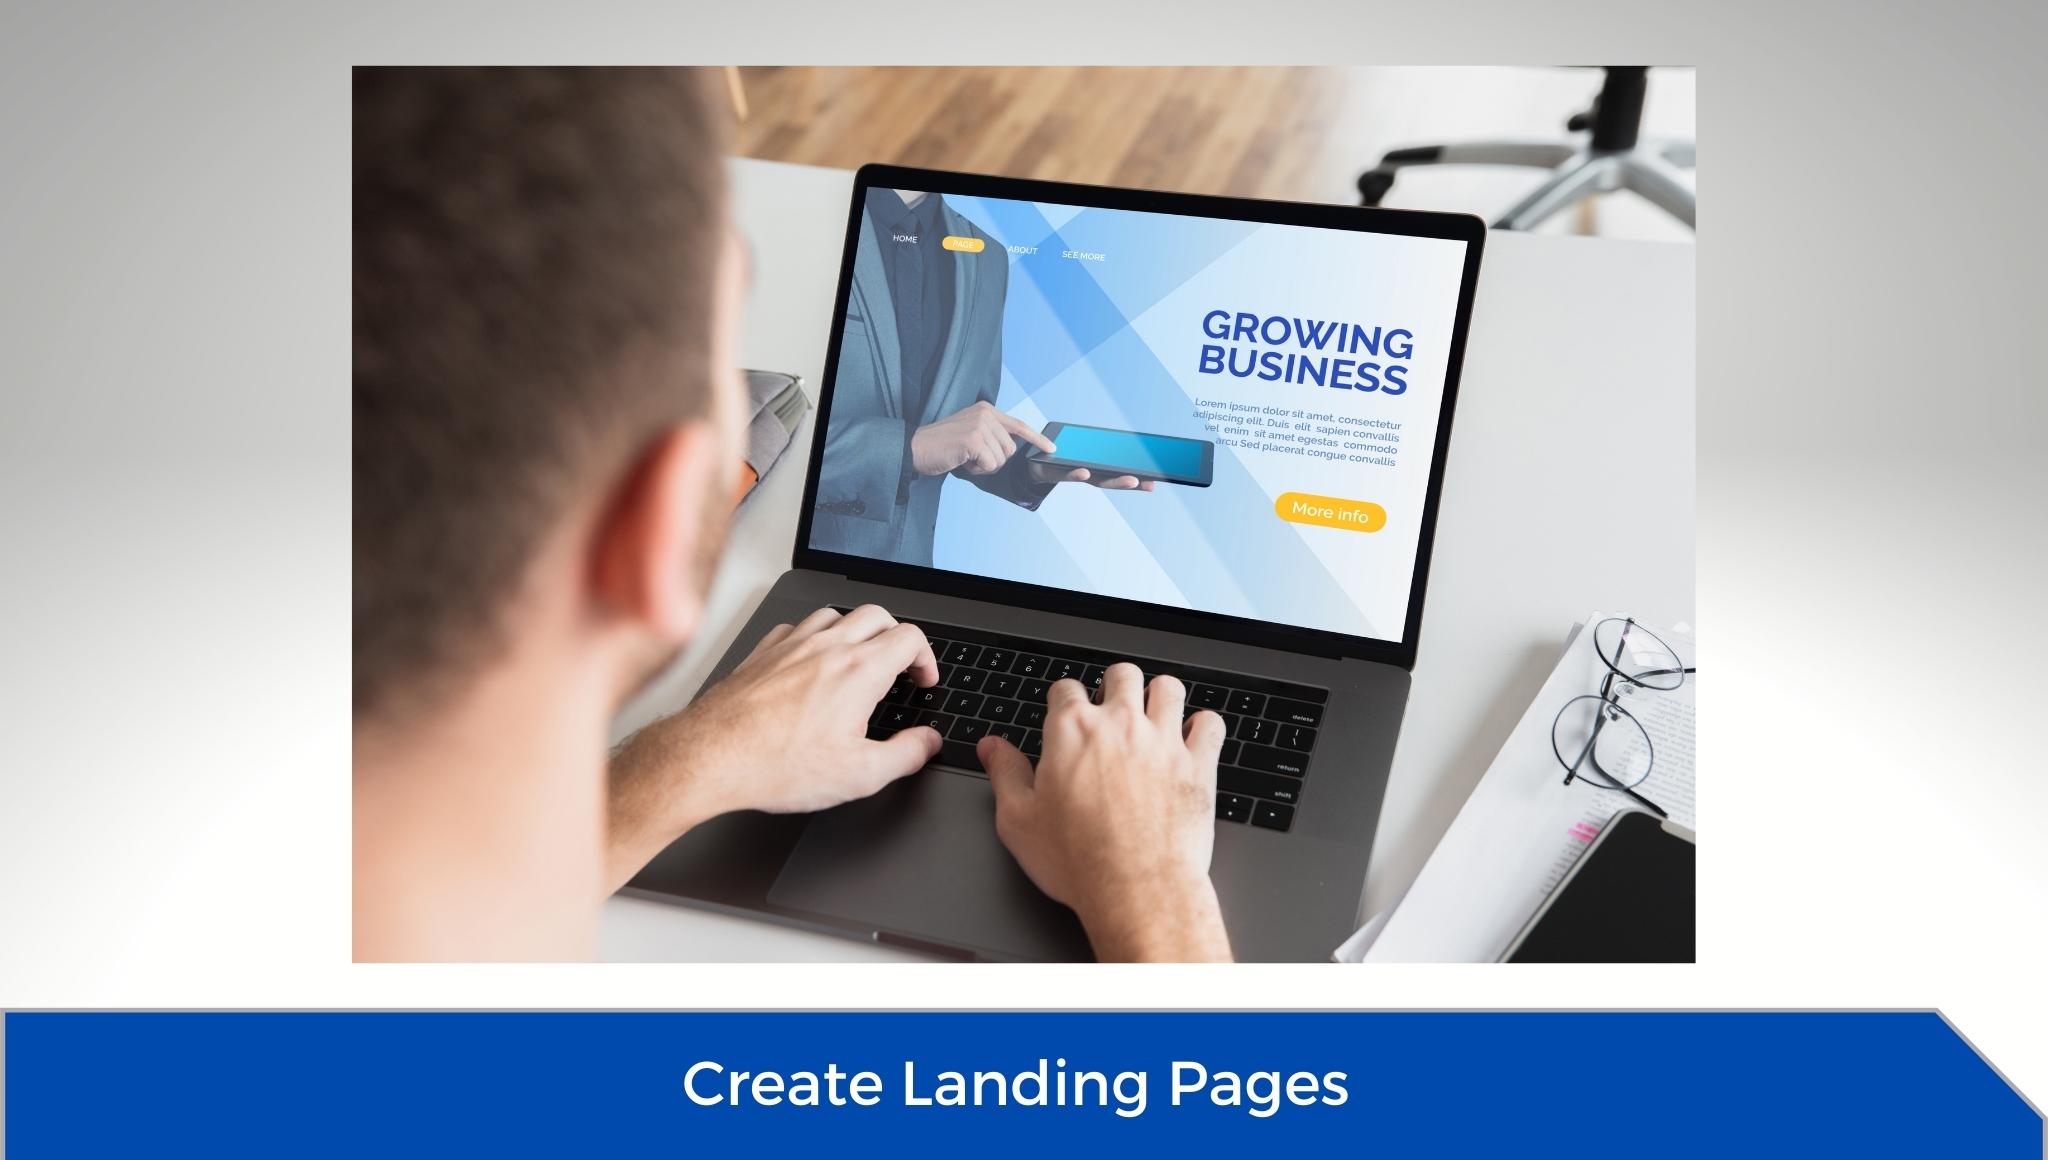 Create landing pages